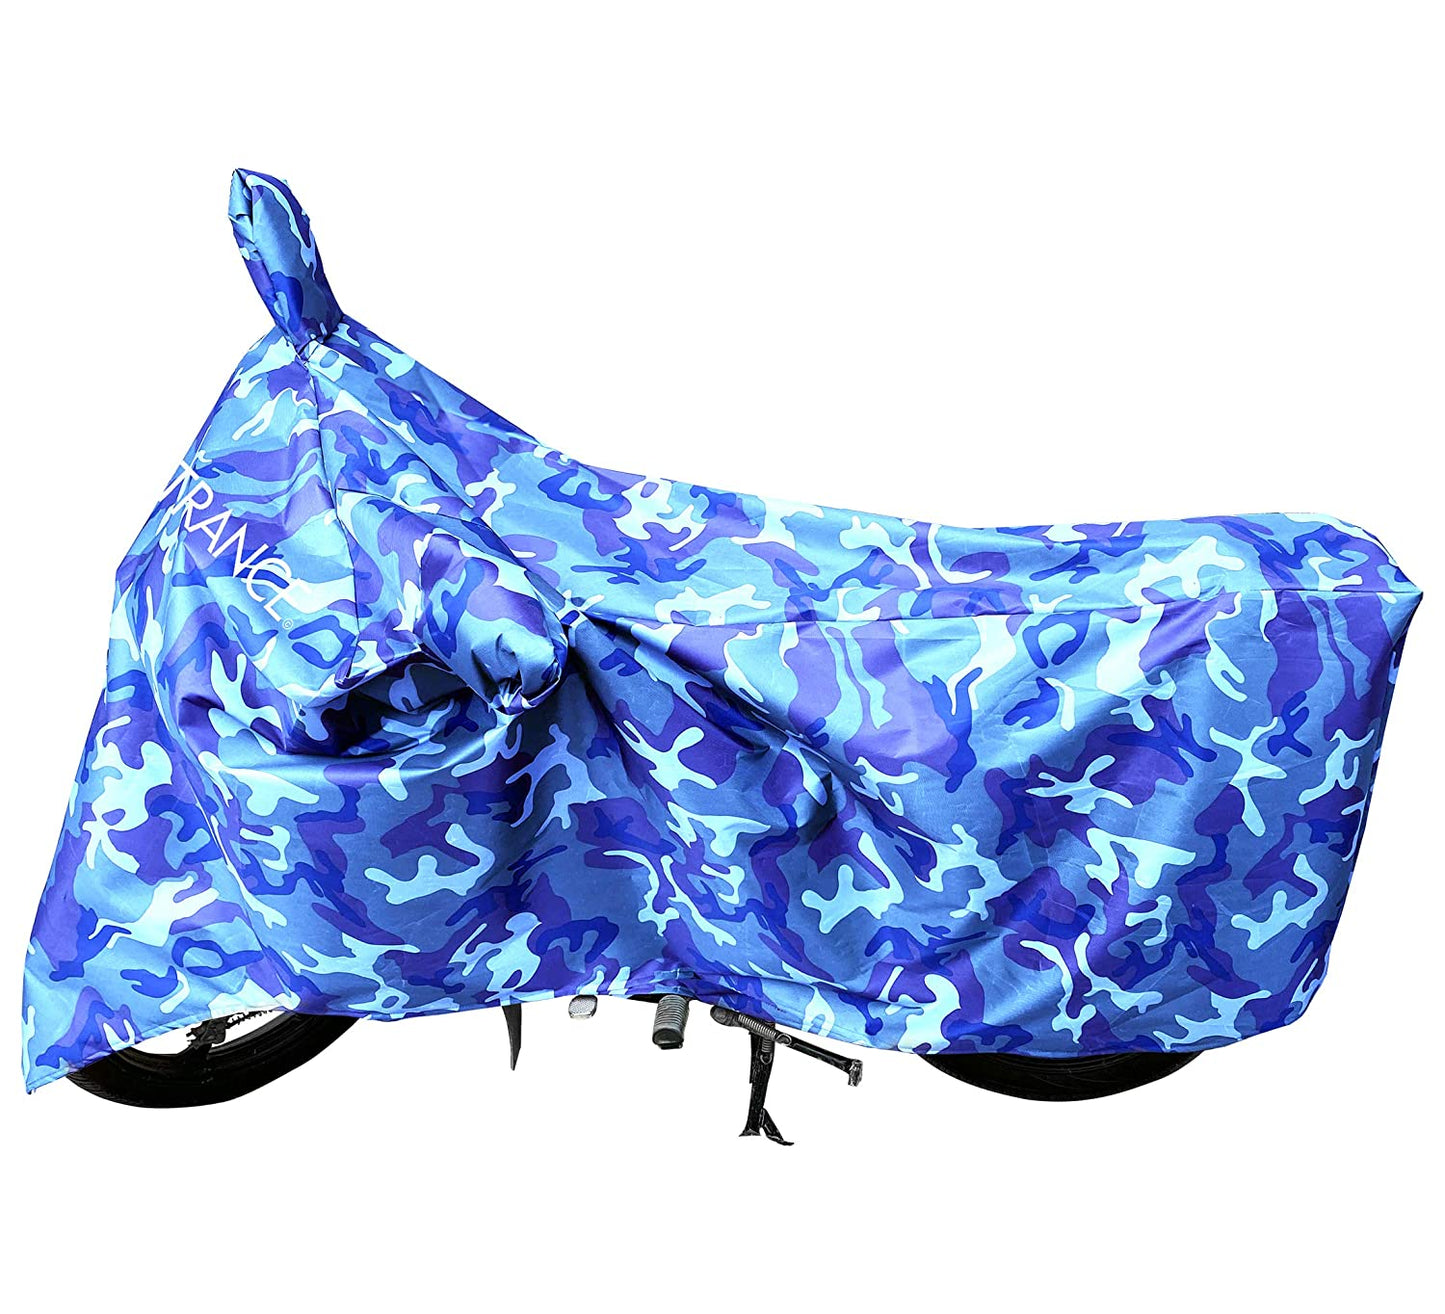 MotoTrance Jungle Bike Body Covers For Mahindra Rodeo UZO - Interlock-Stitched Waterproof and Heat Resistant with Mirror Pockets